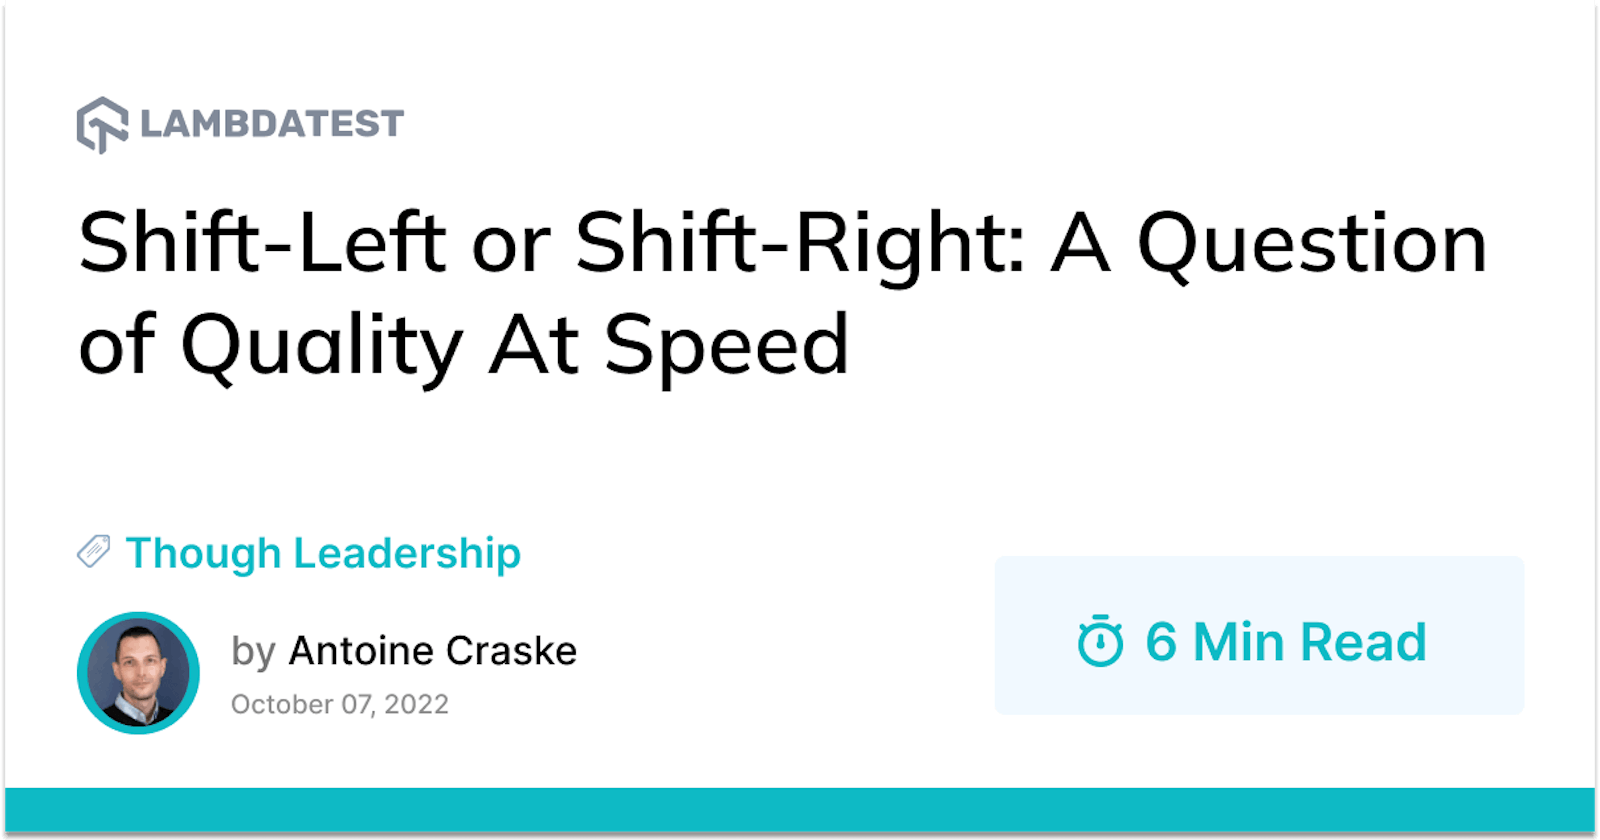 Shift-Left or Shift-Right: A Question of Quality At Speed